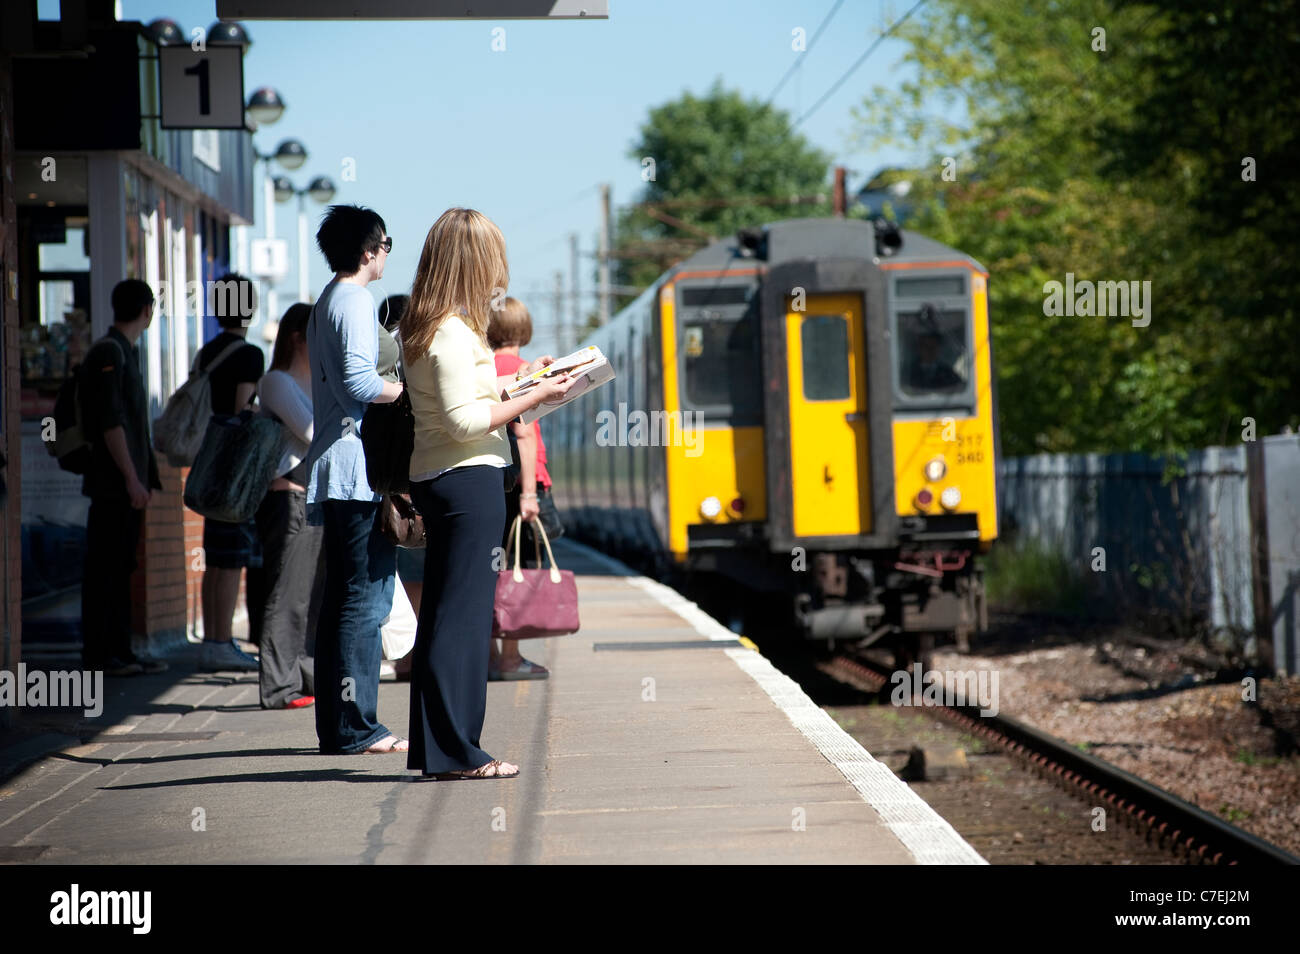 Passengers waiting on a railway station platform as a train approaches. Stock Photo